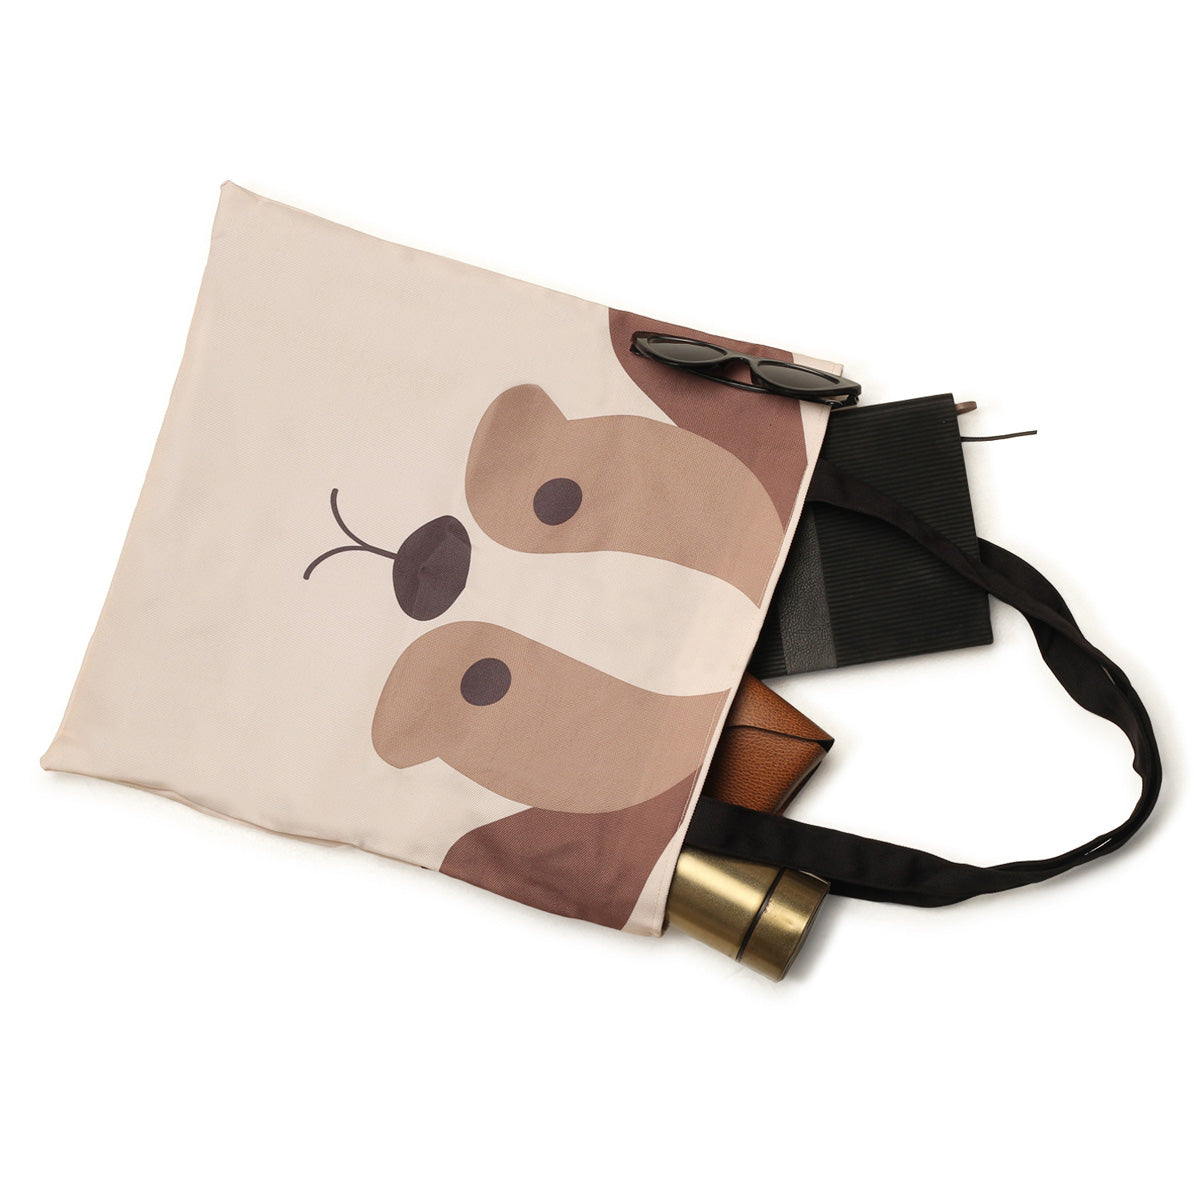 Fashionable tote bag with a whimsical dog face design, a playful addition to any outfit.